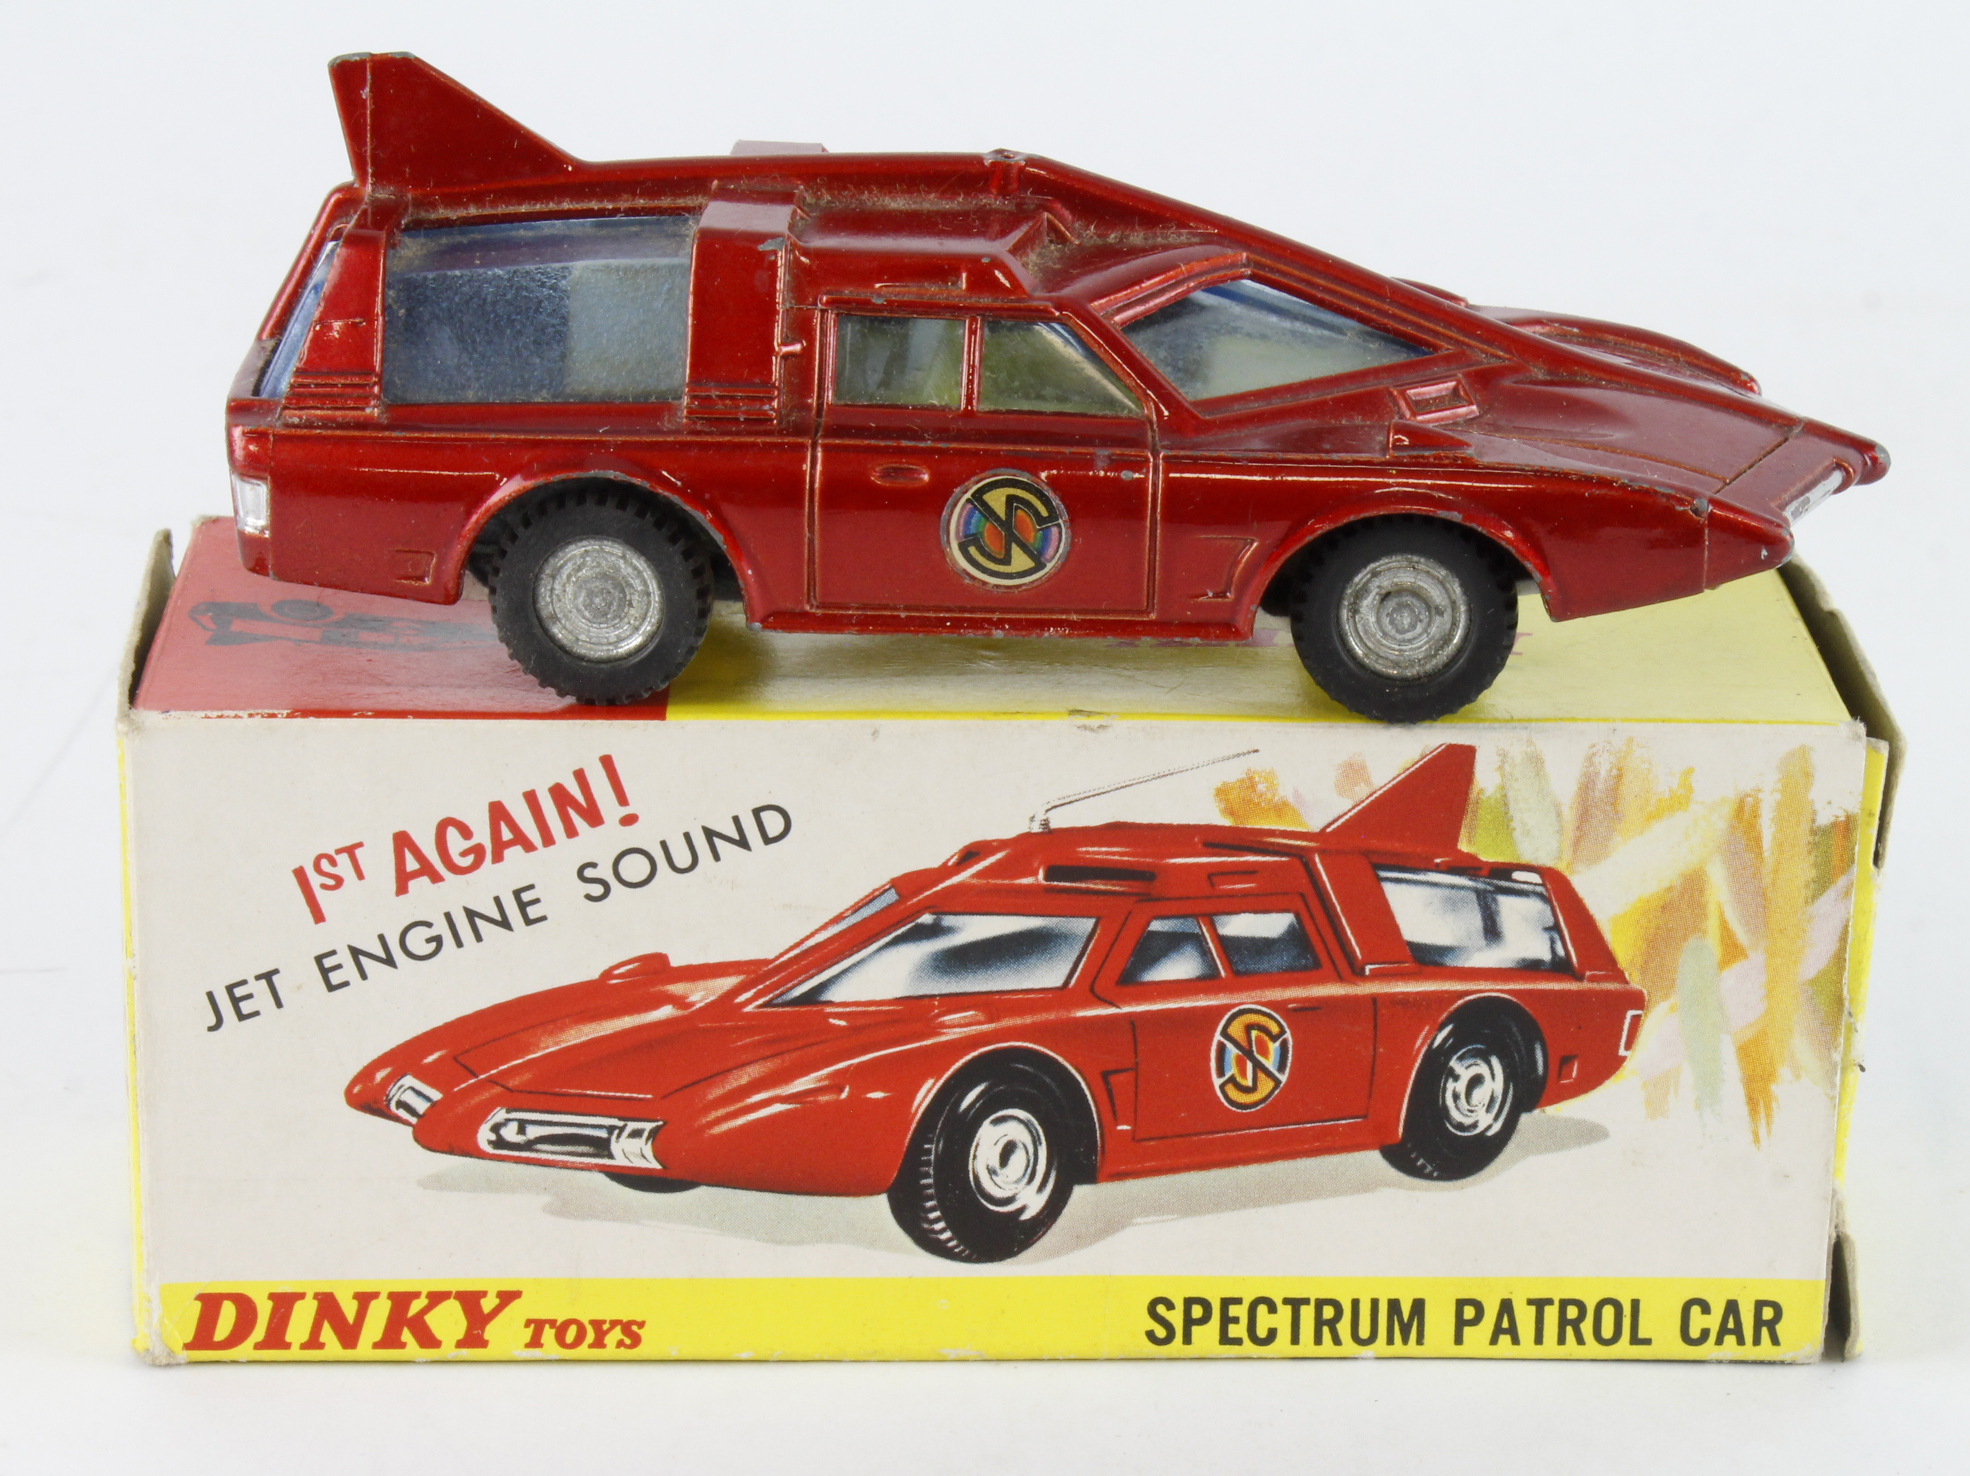 Dinky Toys, no. 103 'Captain Scarlet, Spectrum Patrol Car', contained in original box